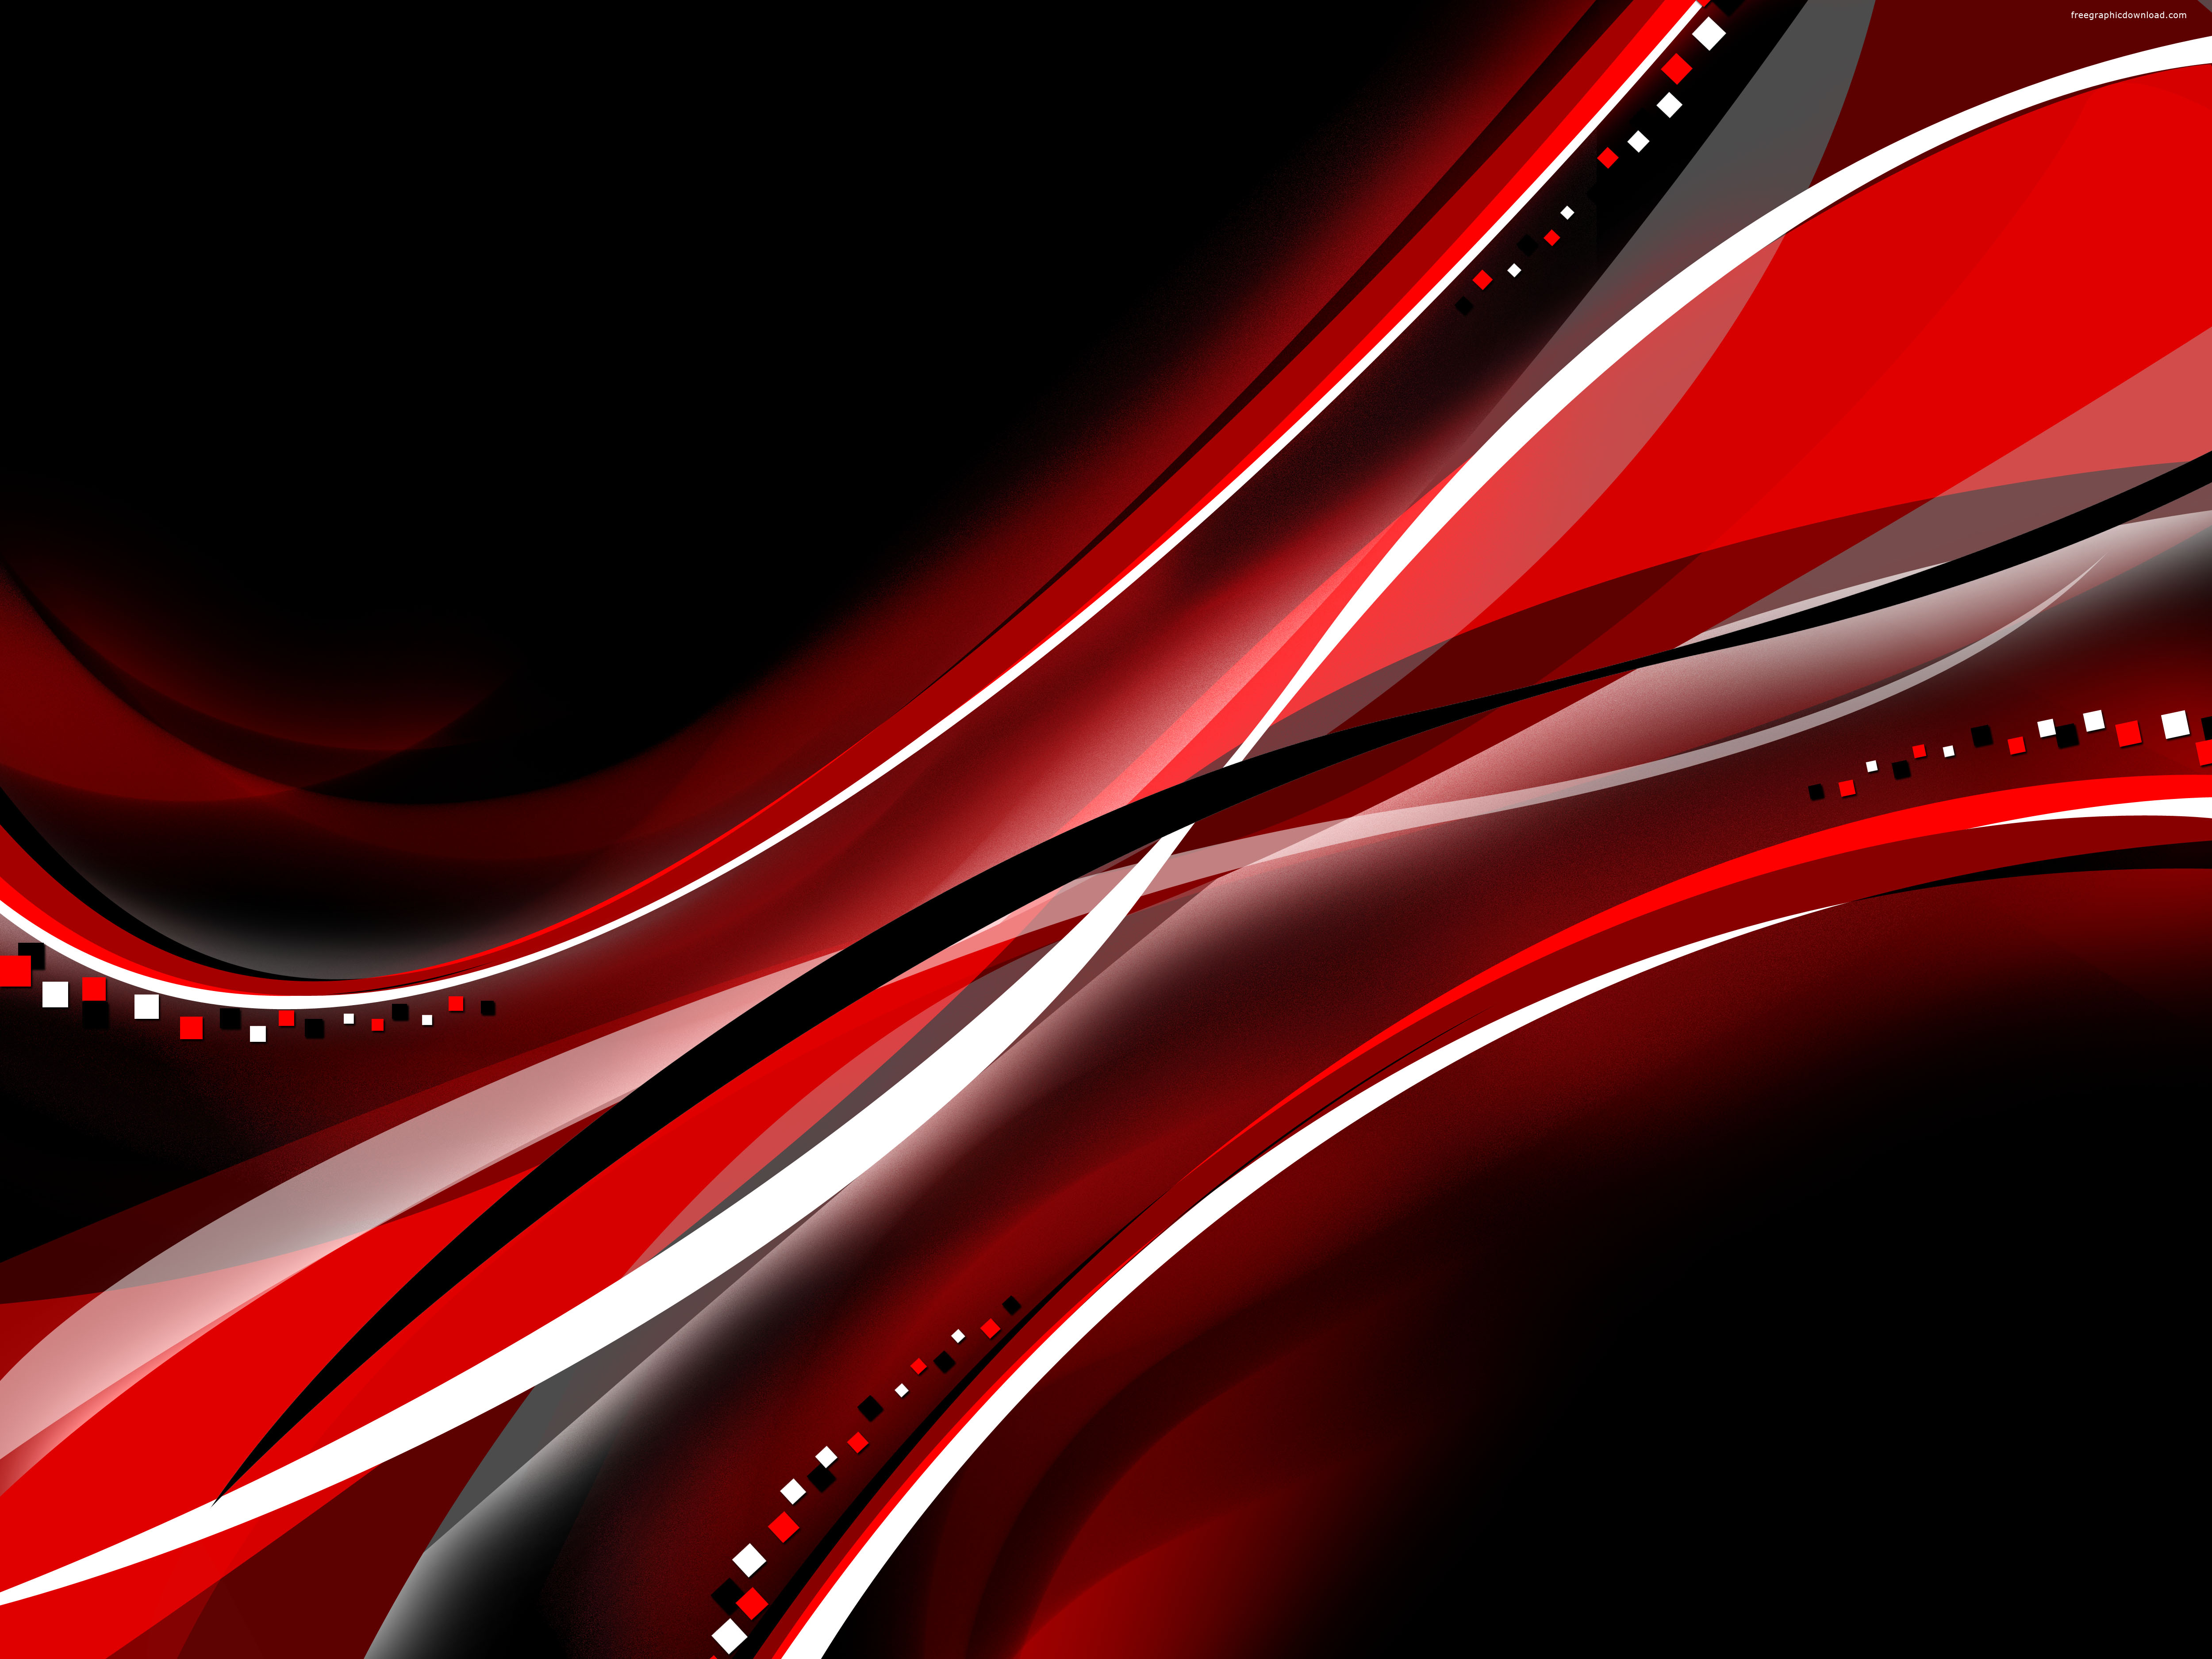 Black And Red Abstract Mobile Wallpaper Amazing Wallpaperz